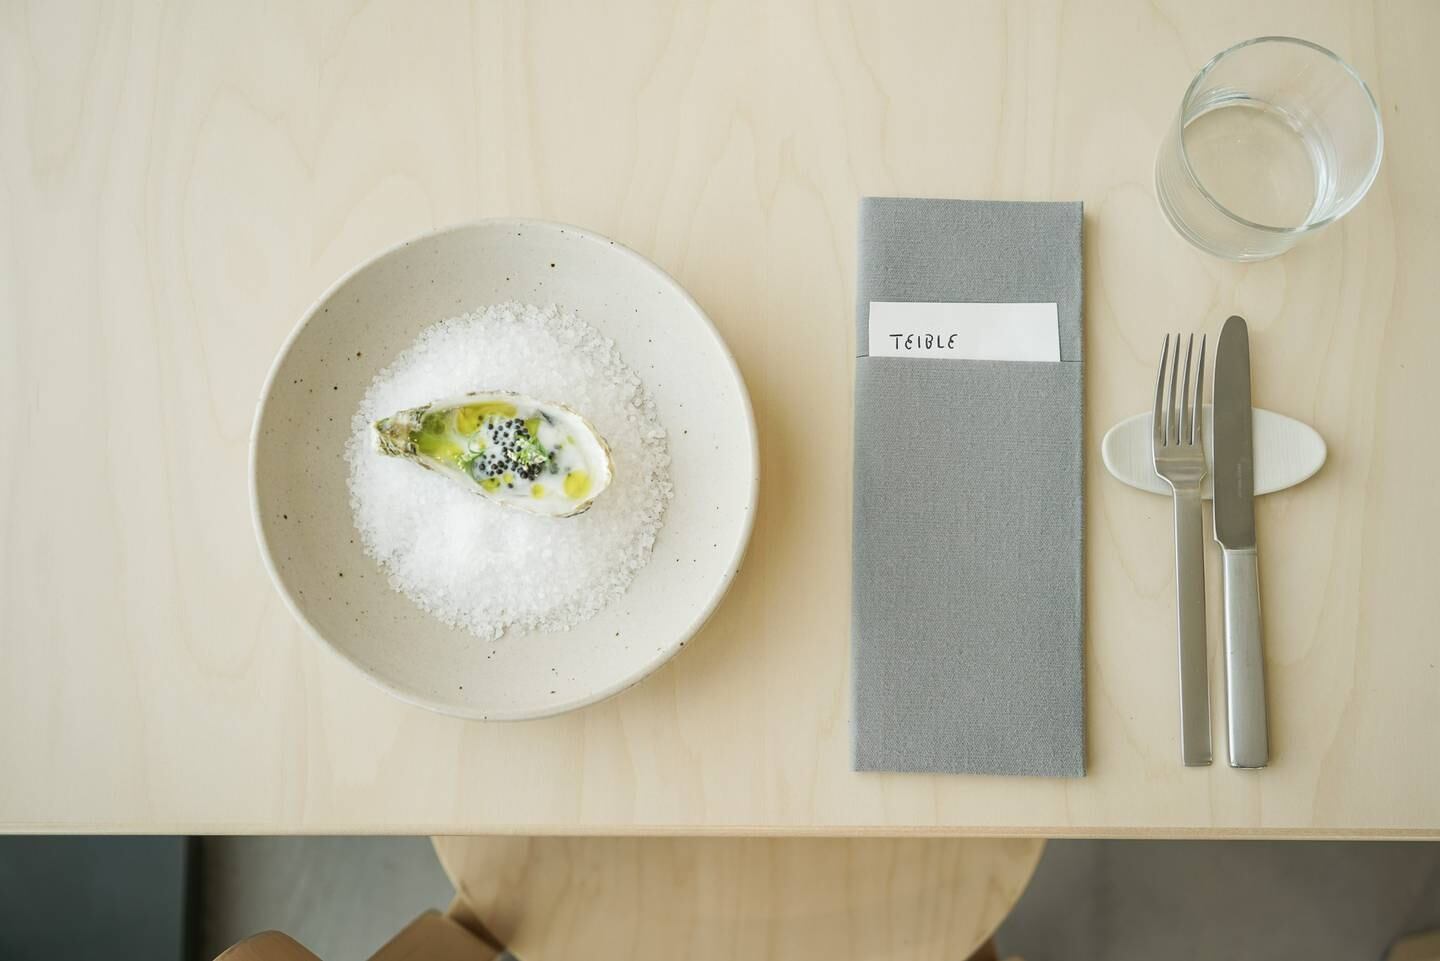 Teible focuses on fresh, local, seasonal and creatively combined ingredients. Photo: Teible